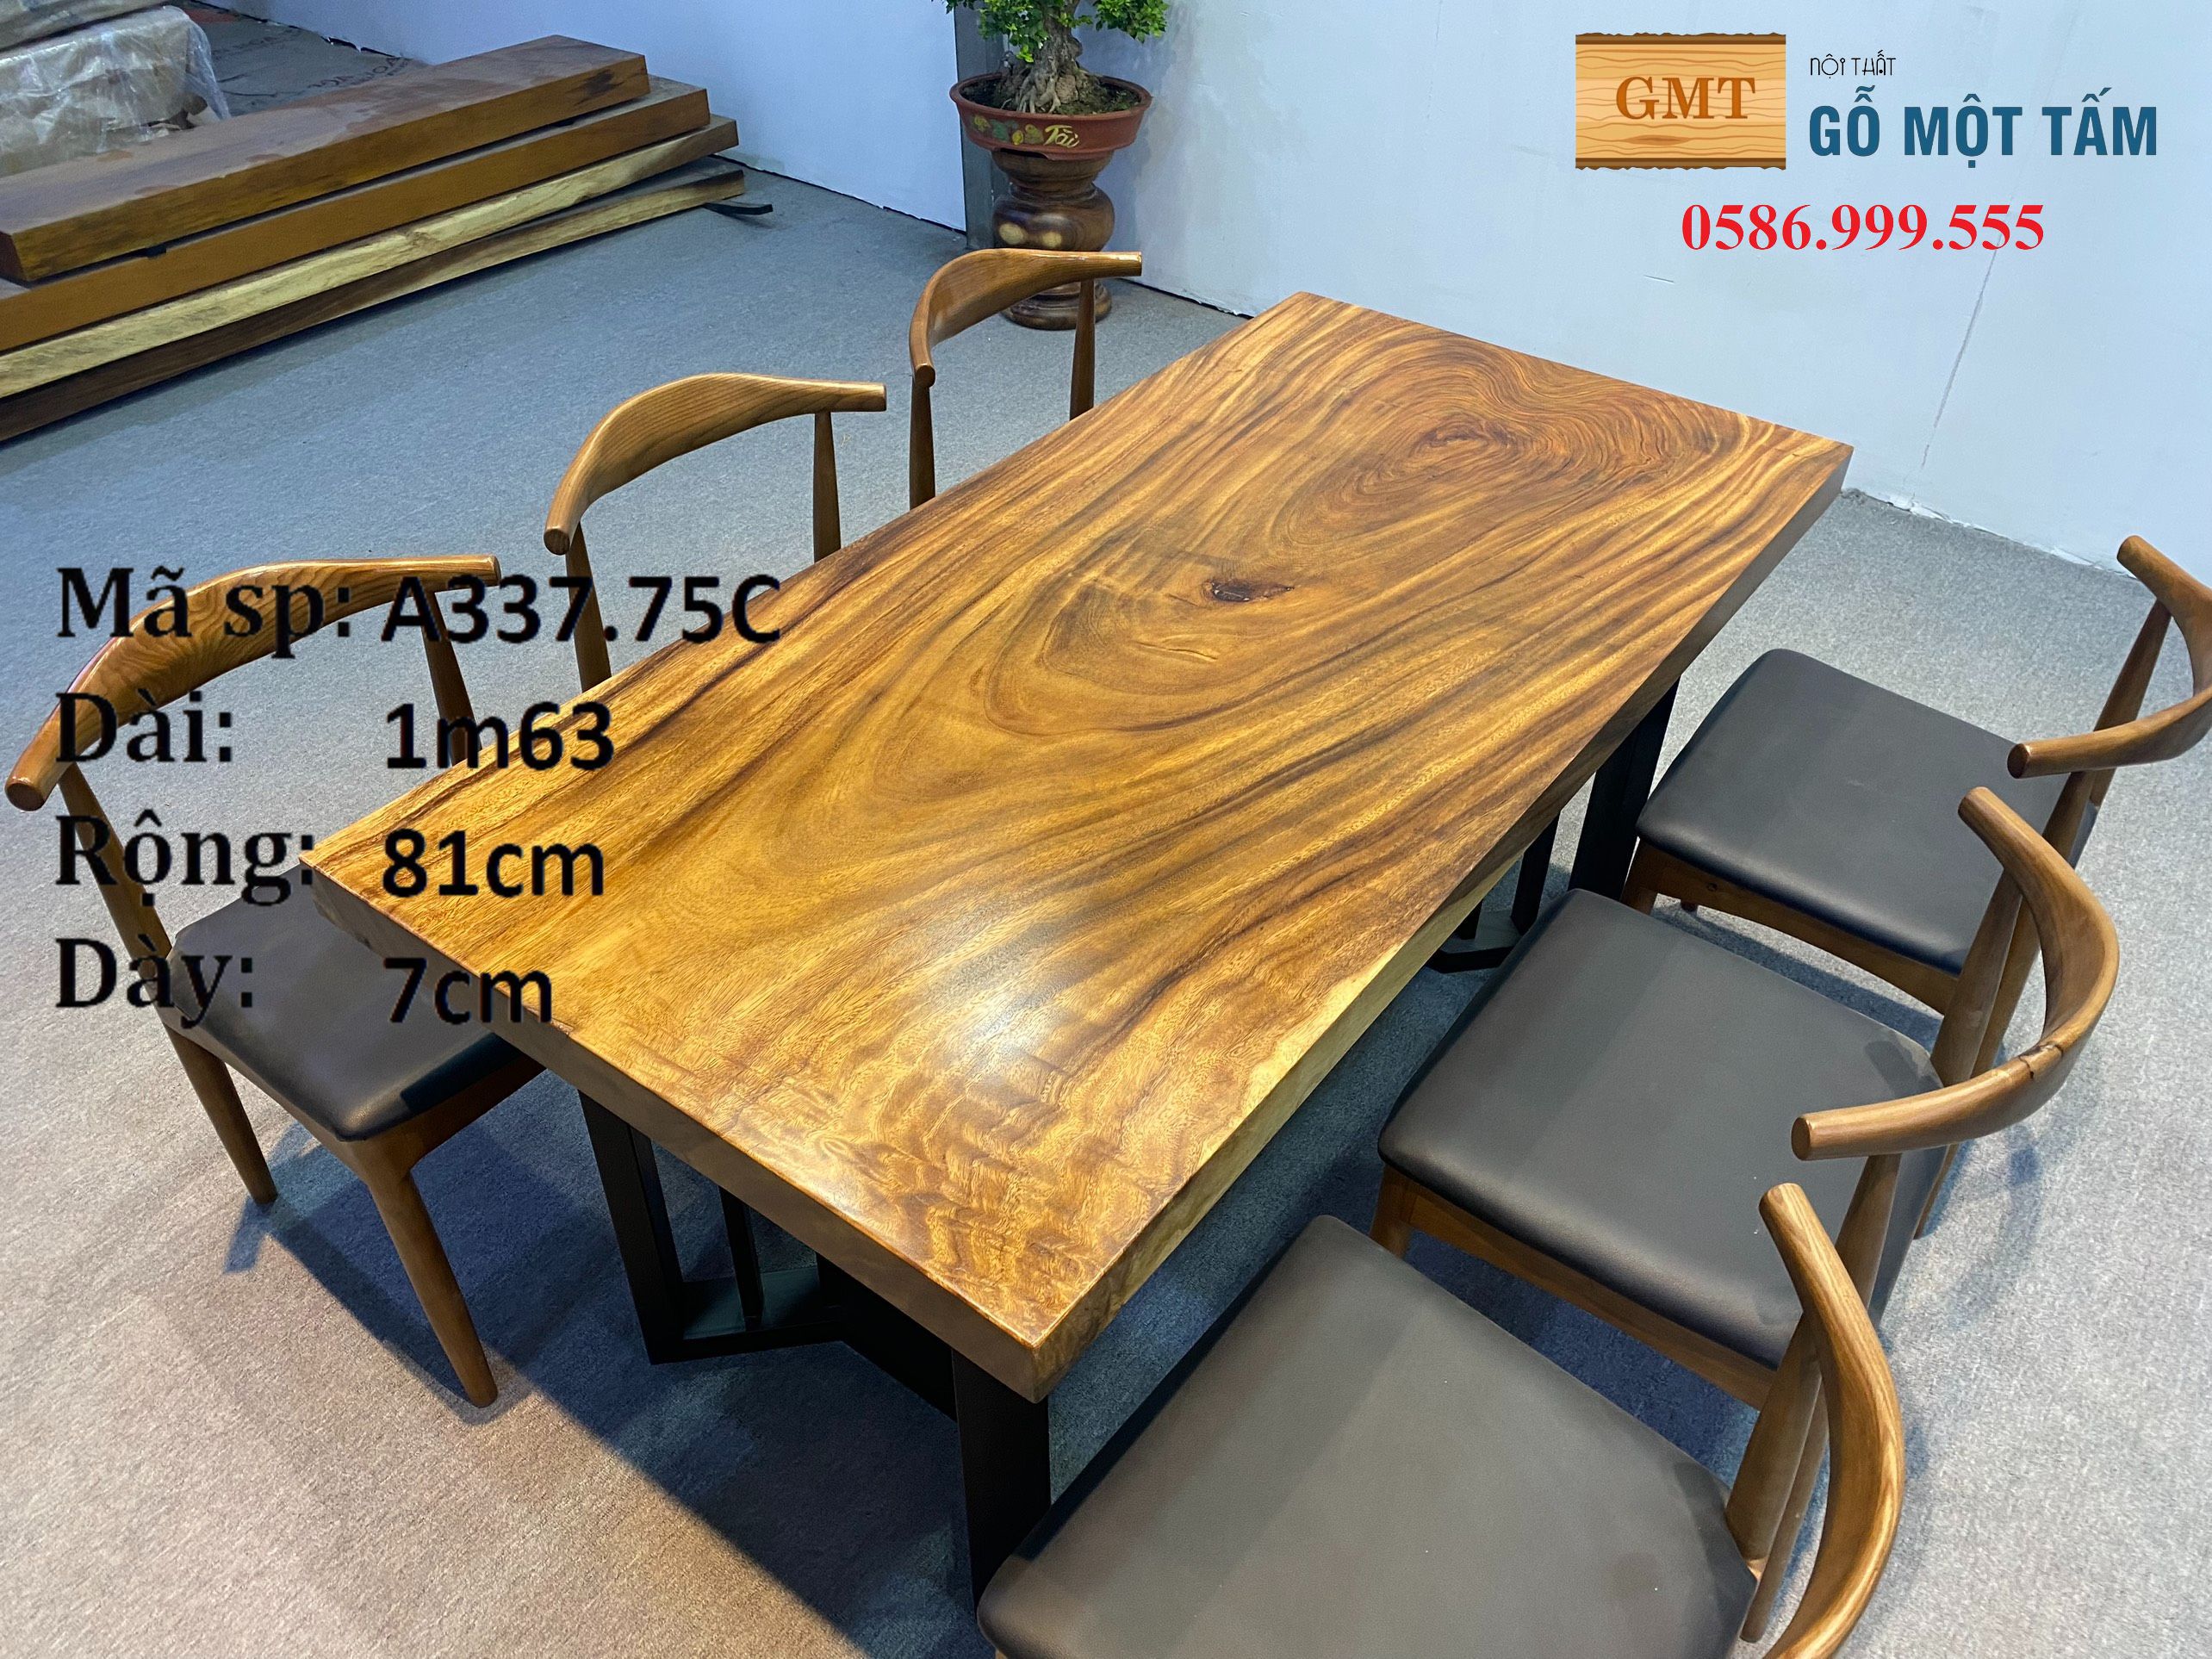 Dining table 6 Wood me western A337 long 1m63 width 81cm thick 7cm factory